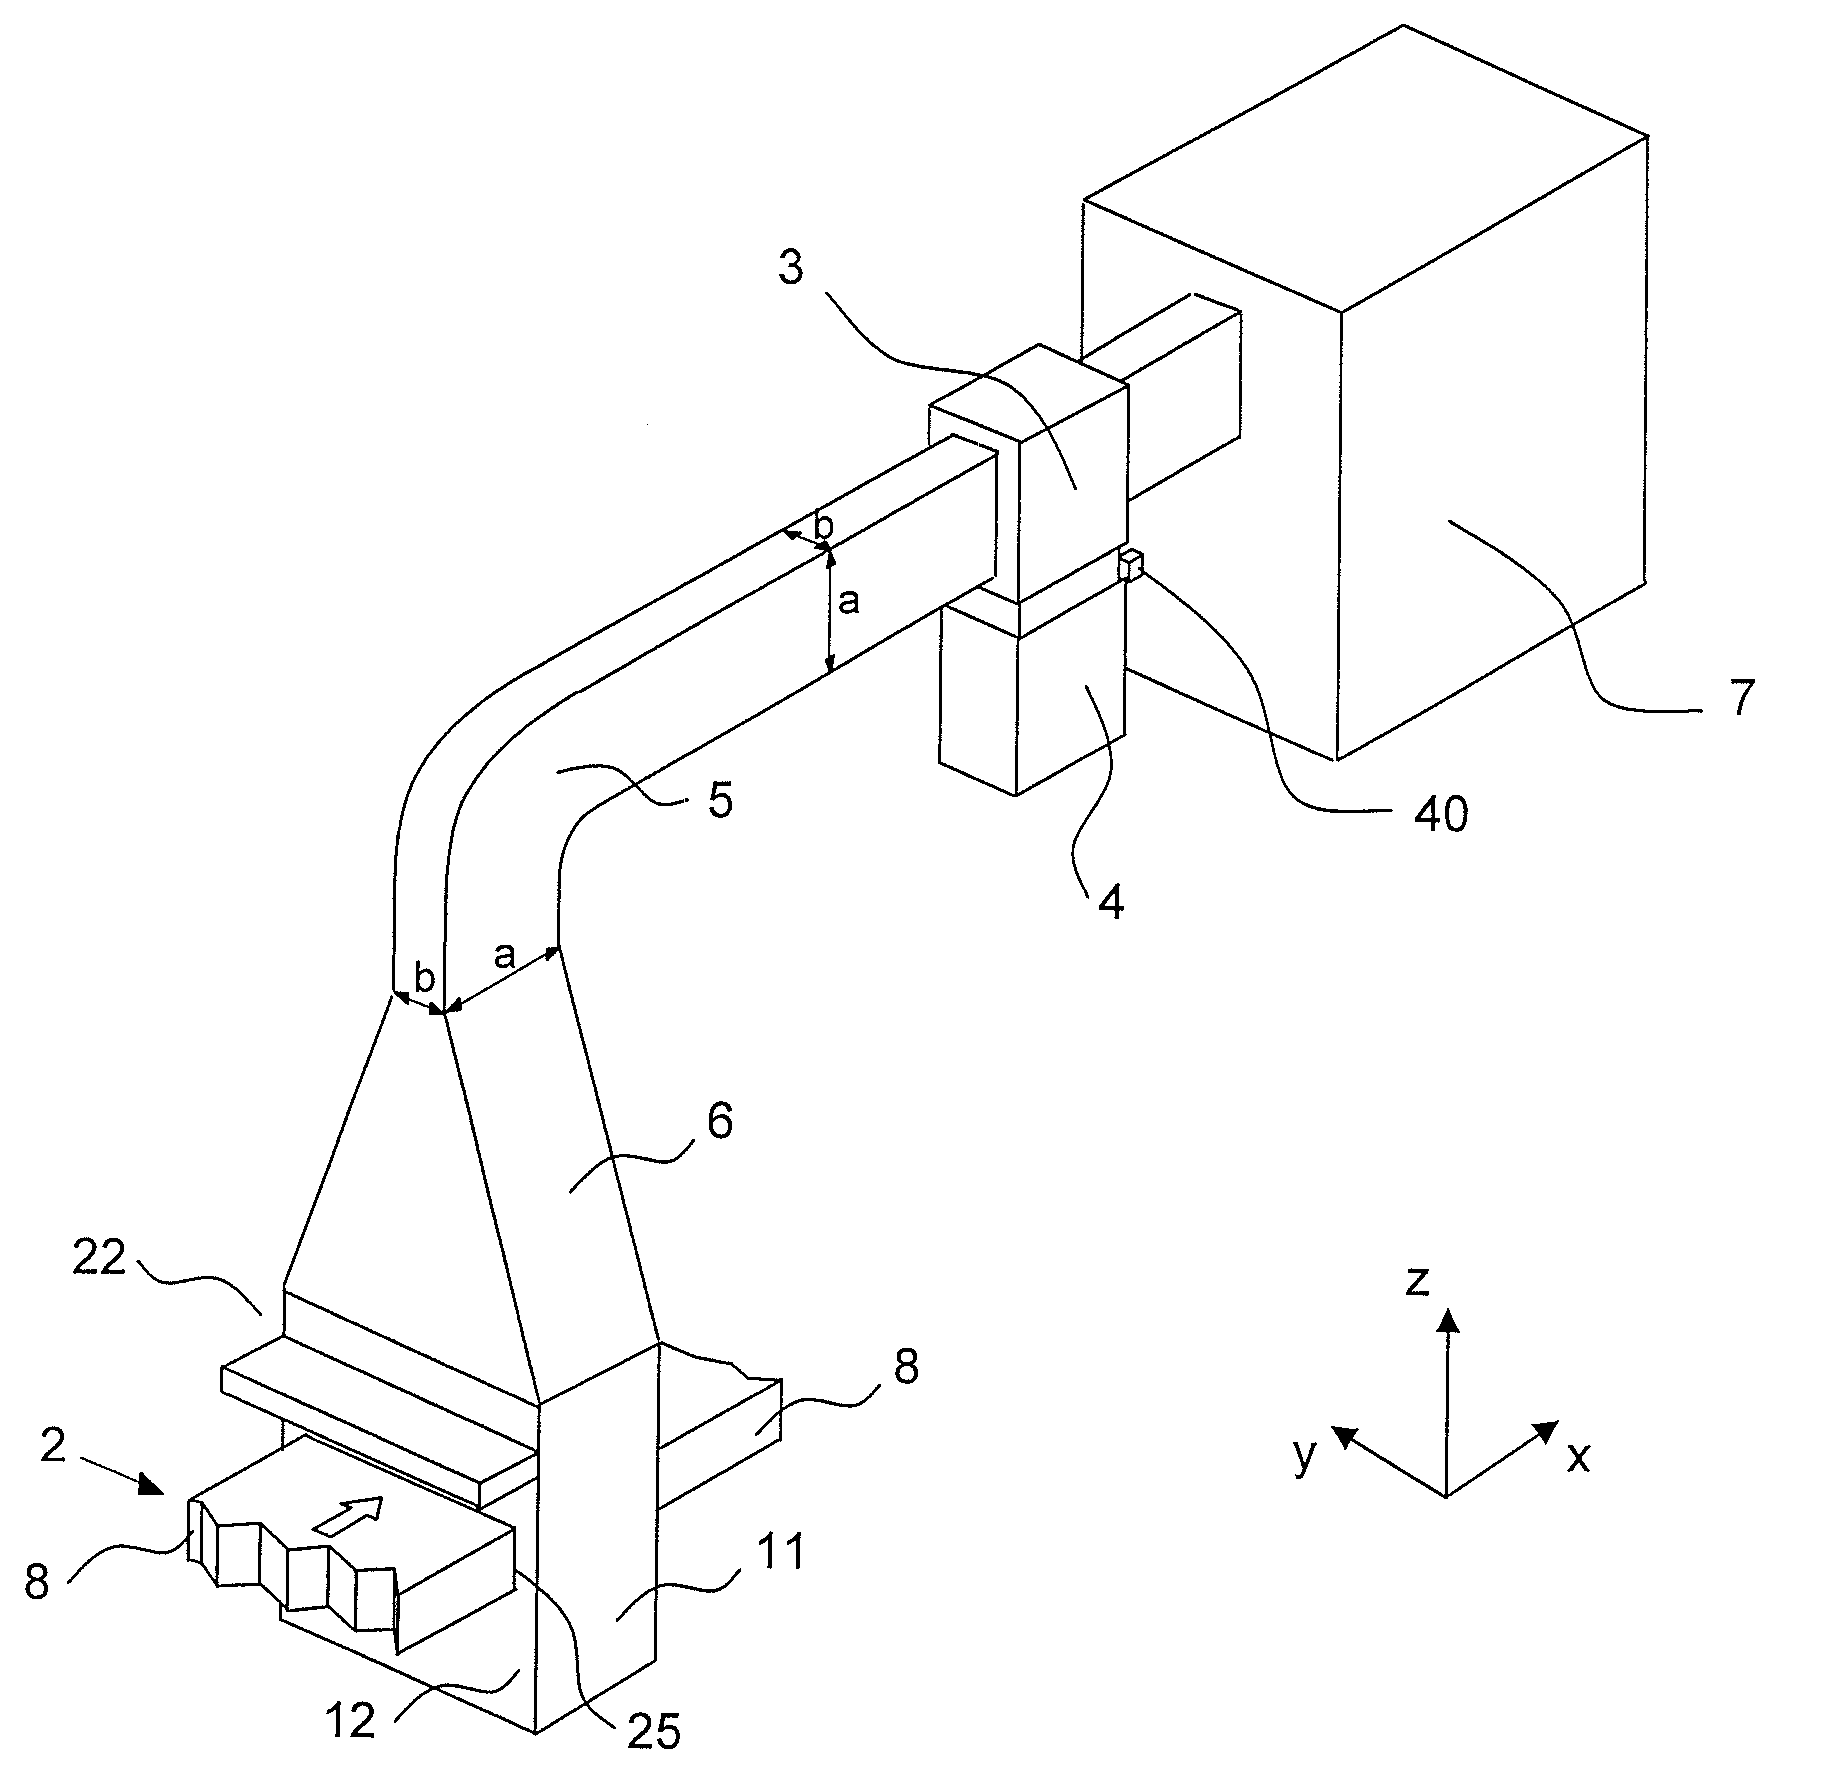 Apparatus for microwave heating of planar products